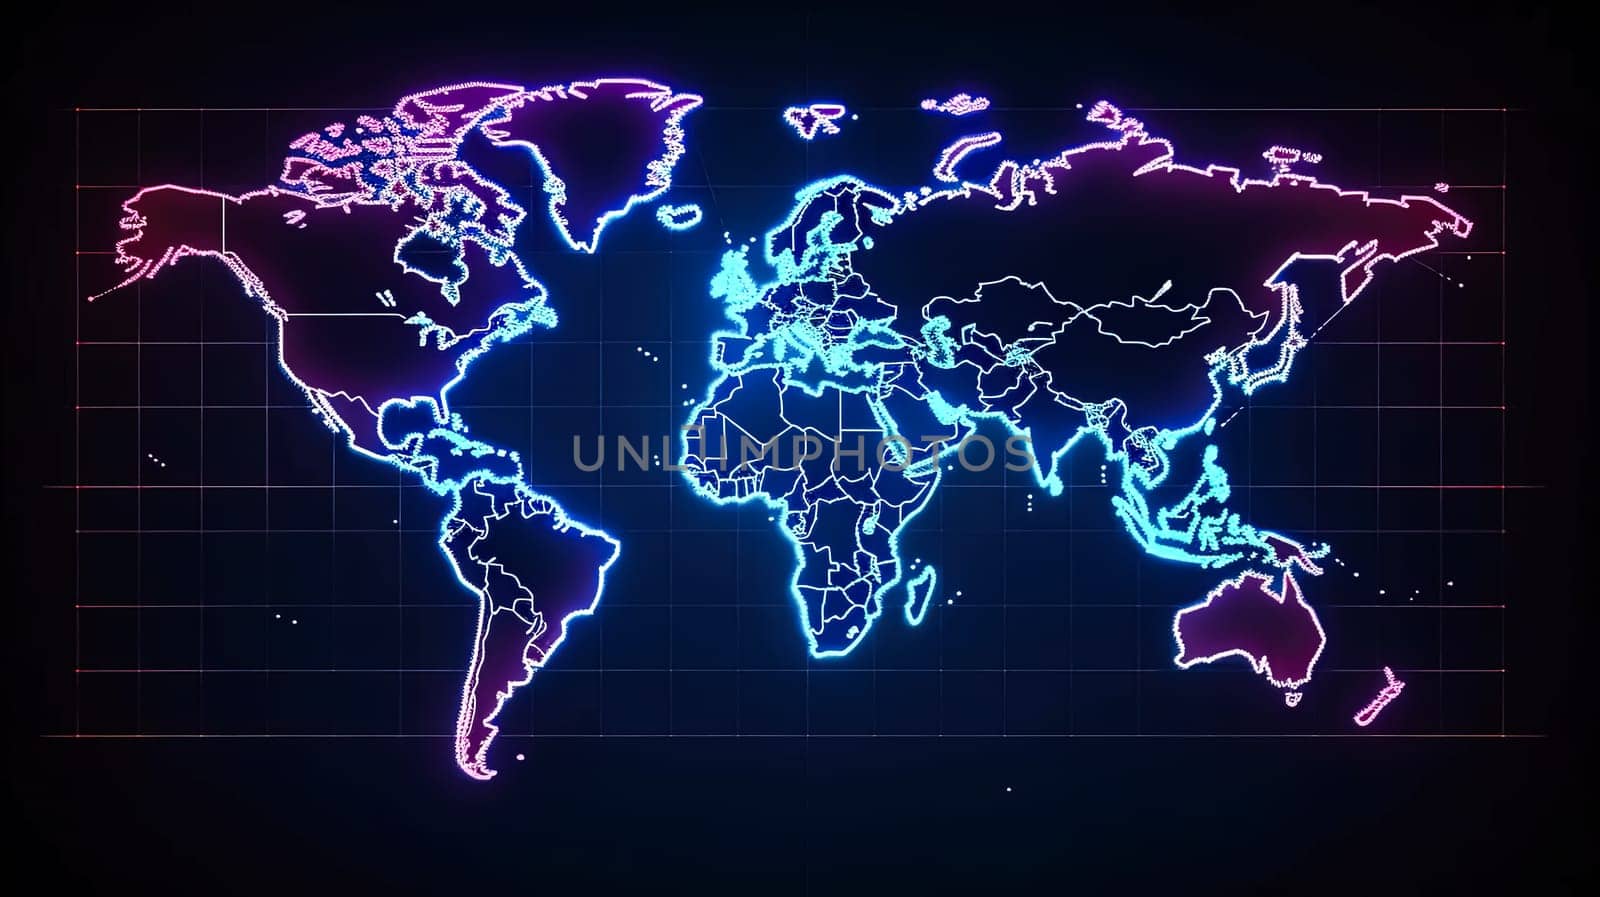 Neon atlas, World map illuminated a dynamic illustration representing the global commitment to energy conservation and a brighter, eco-friendly future